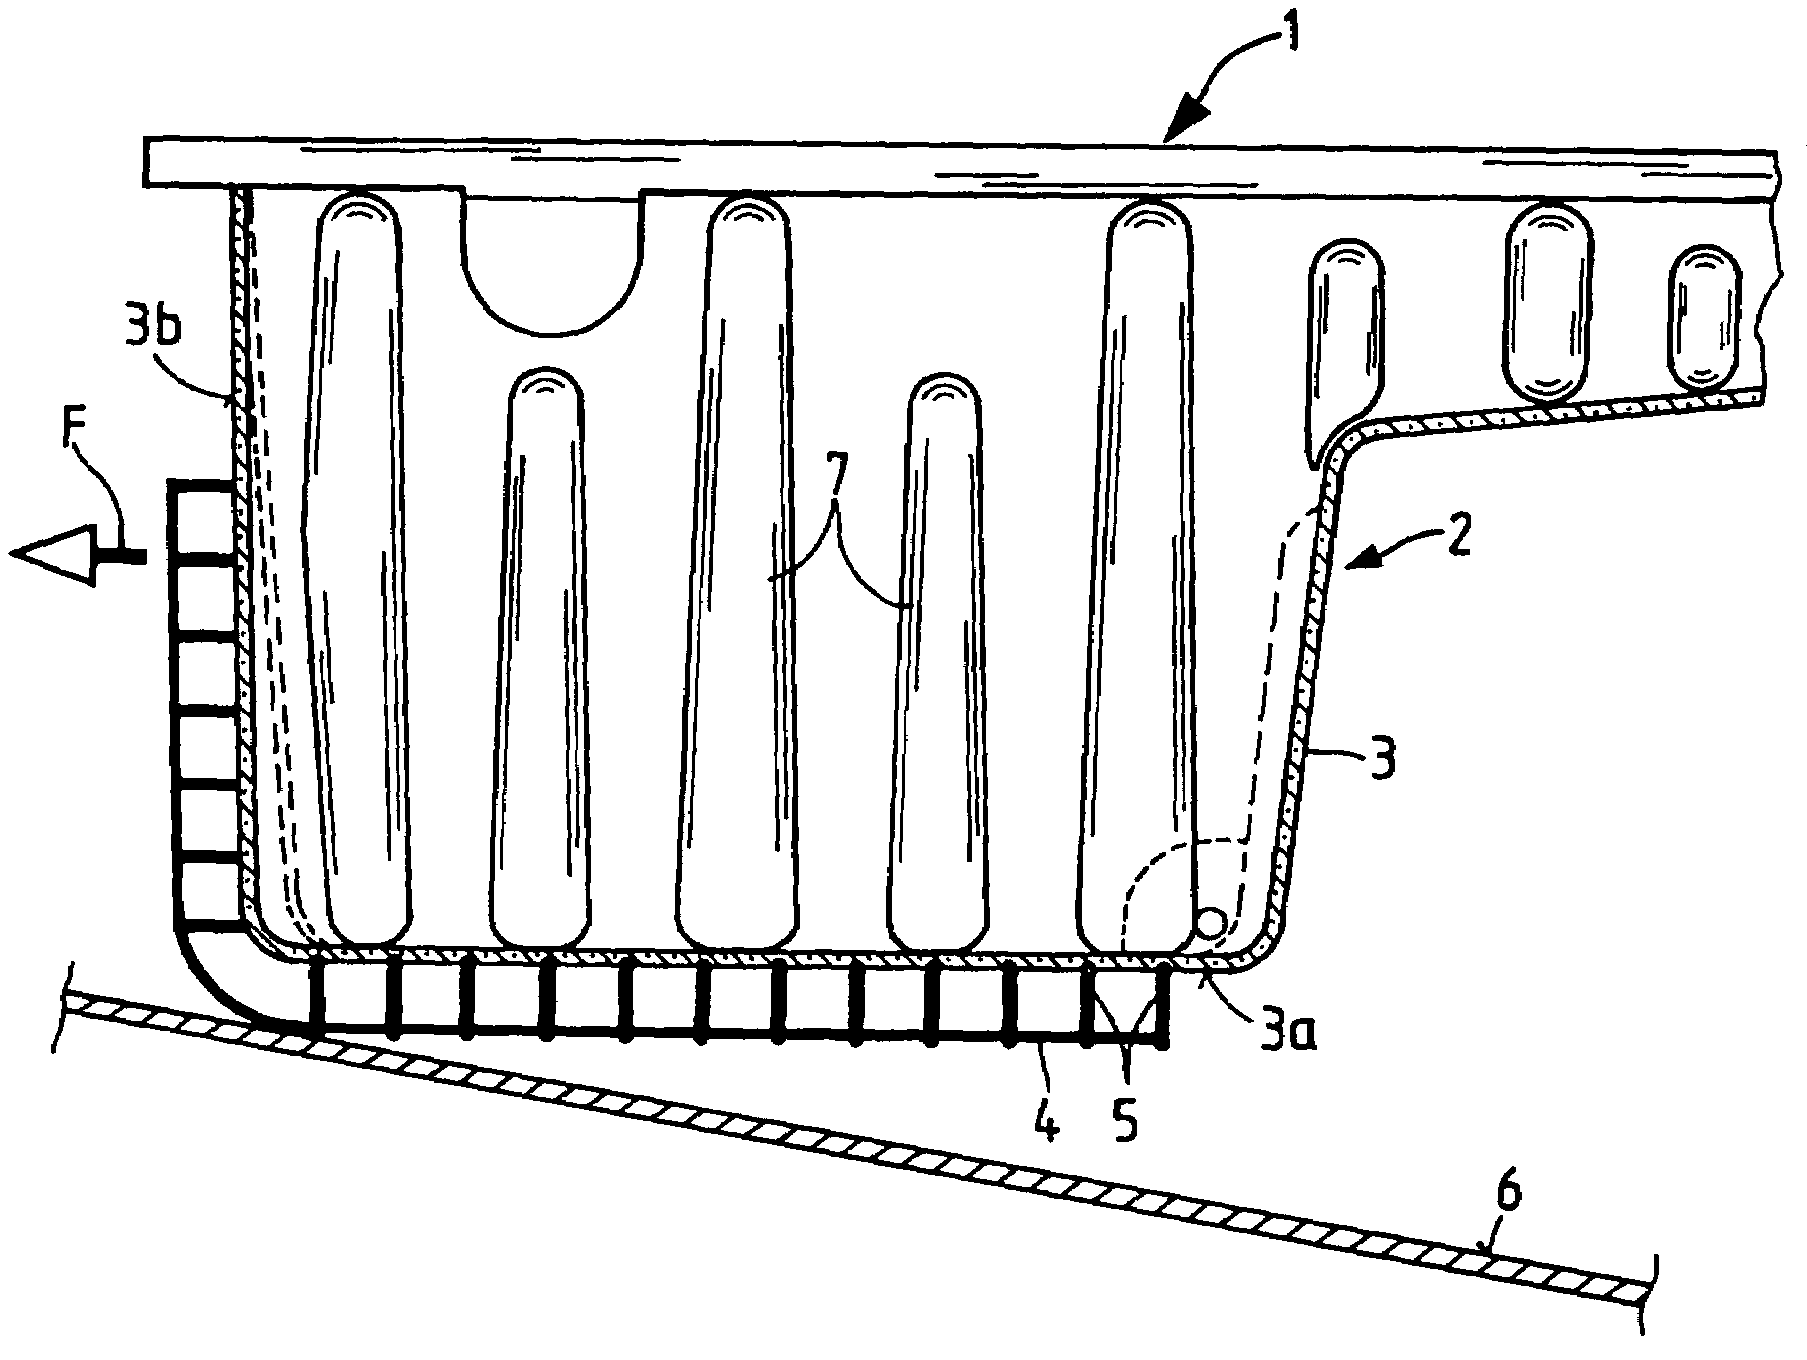 Oil pan useful for an internal combustion engine